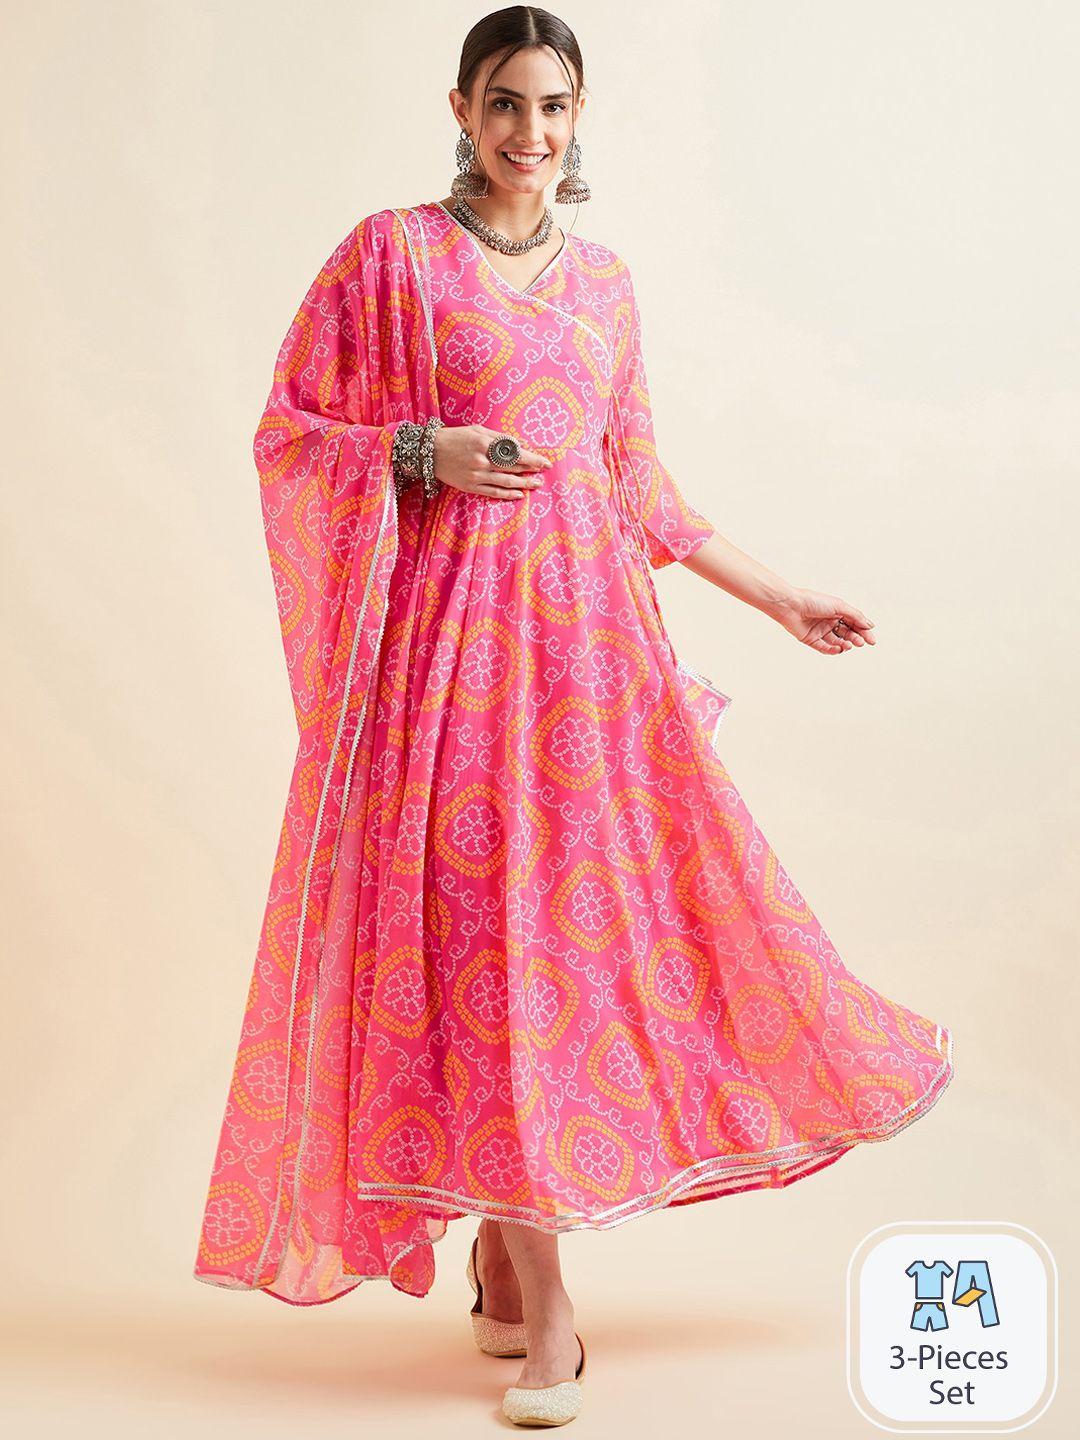 panit-pink-printed-georgette-angrakha-ethnic-dress-with-dupatta